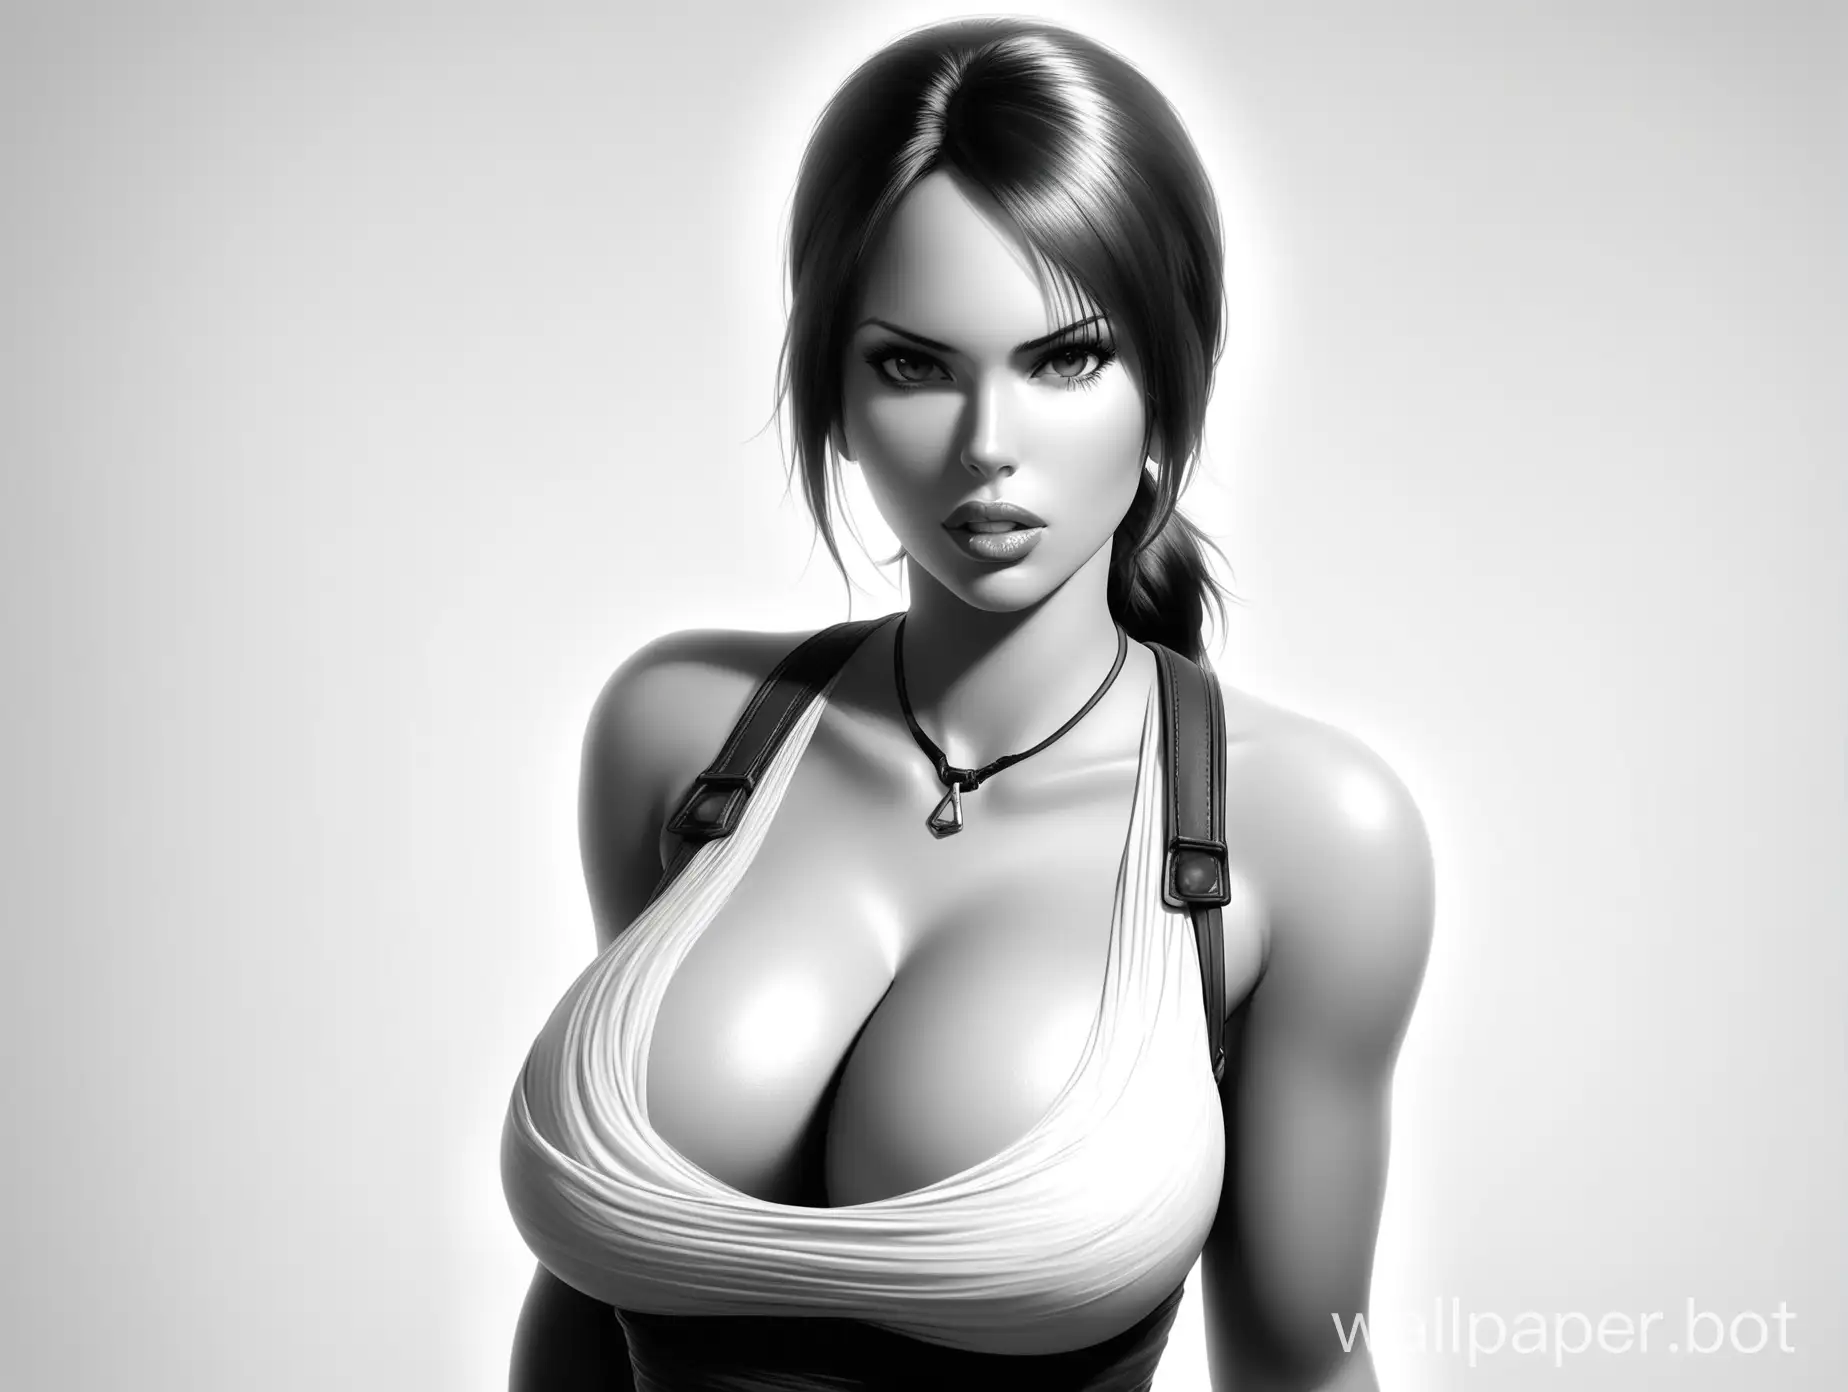 Lara-Croft-Inspired-Portrait-Bold-Monochrome-Image-with-Elegant-Dress-and-Striking-Features